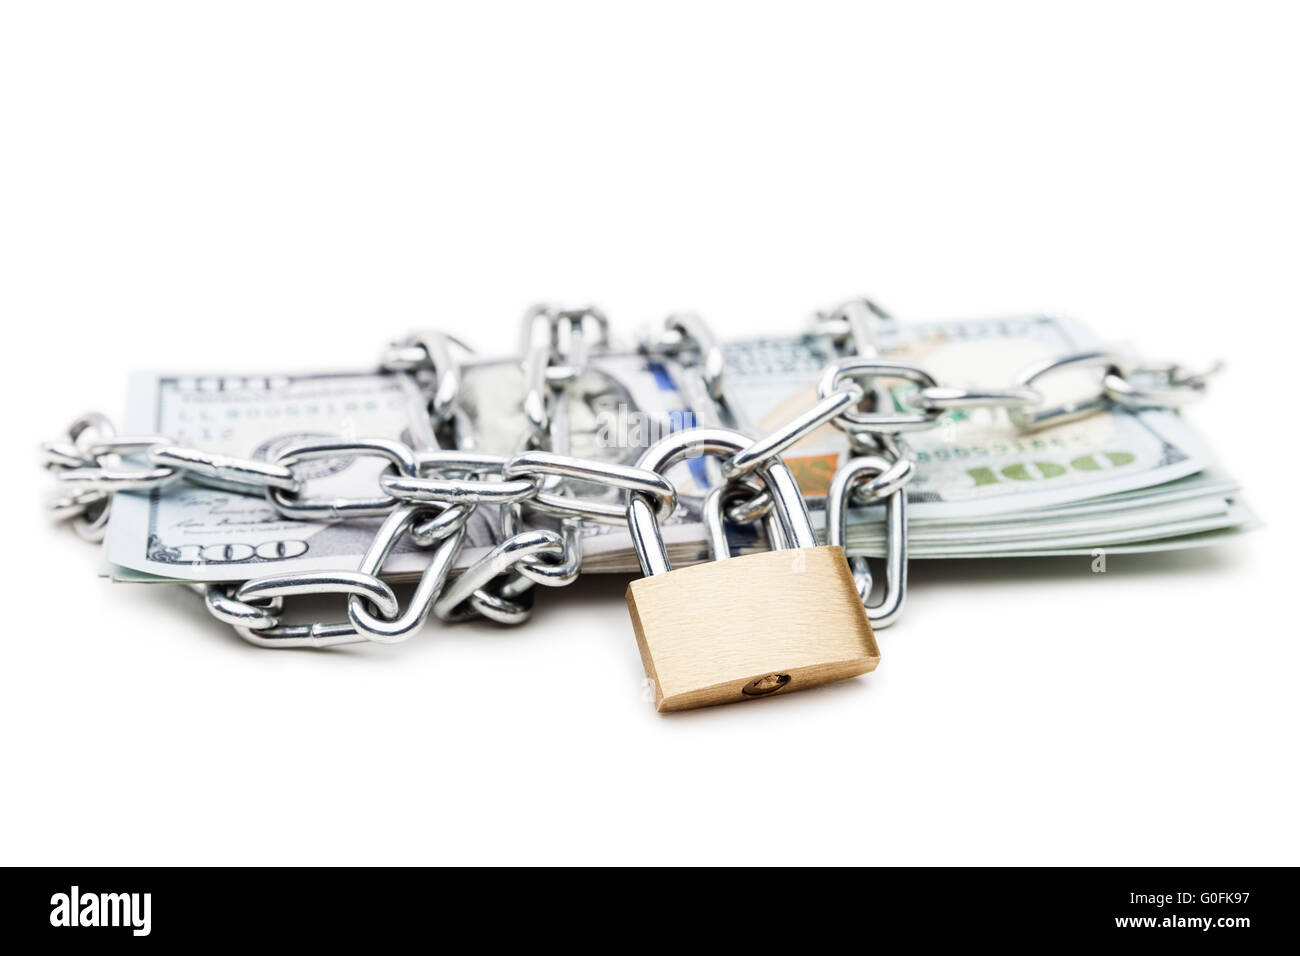 Chain link with padlock on dollar currency money Stock Photo